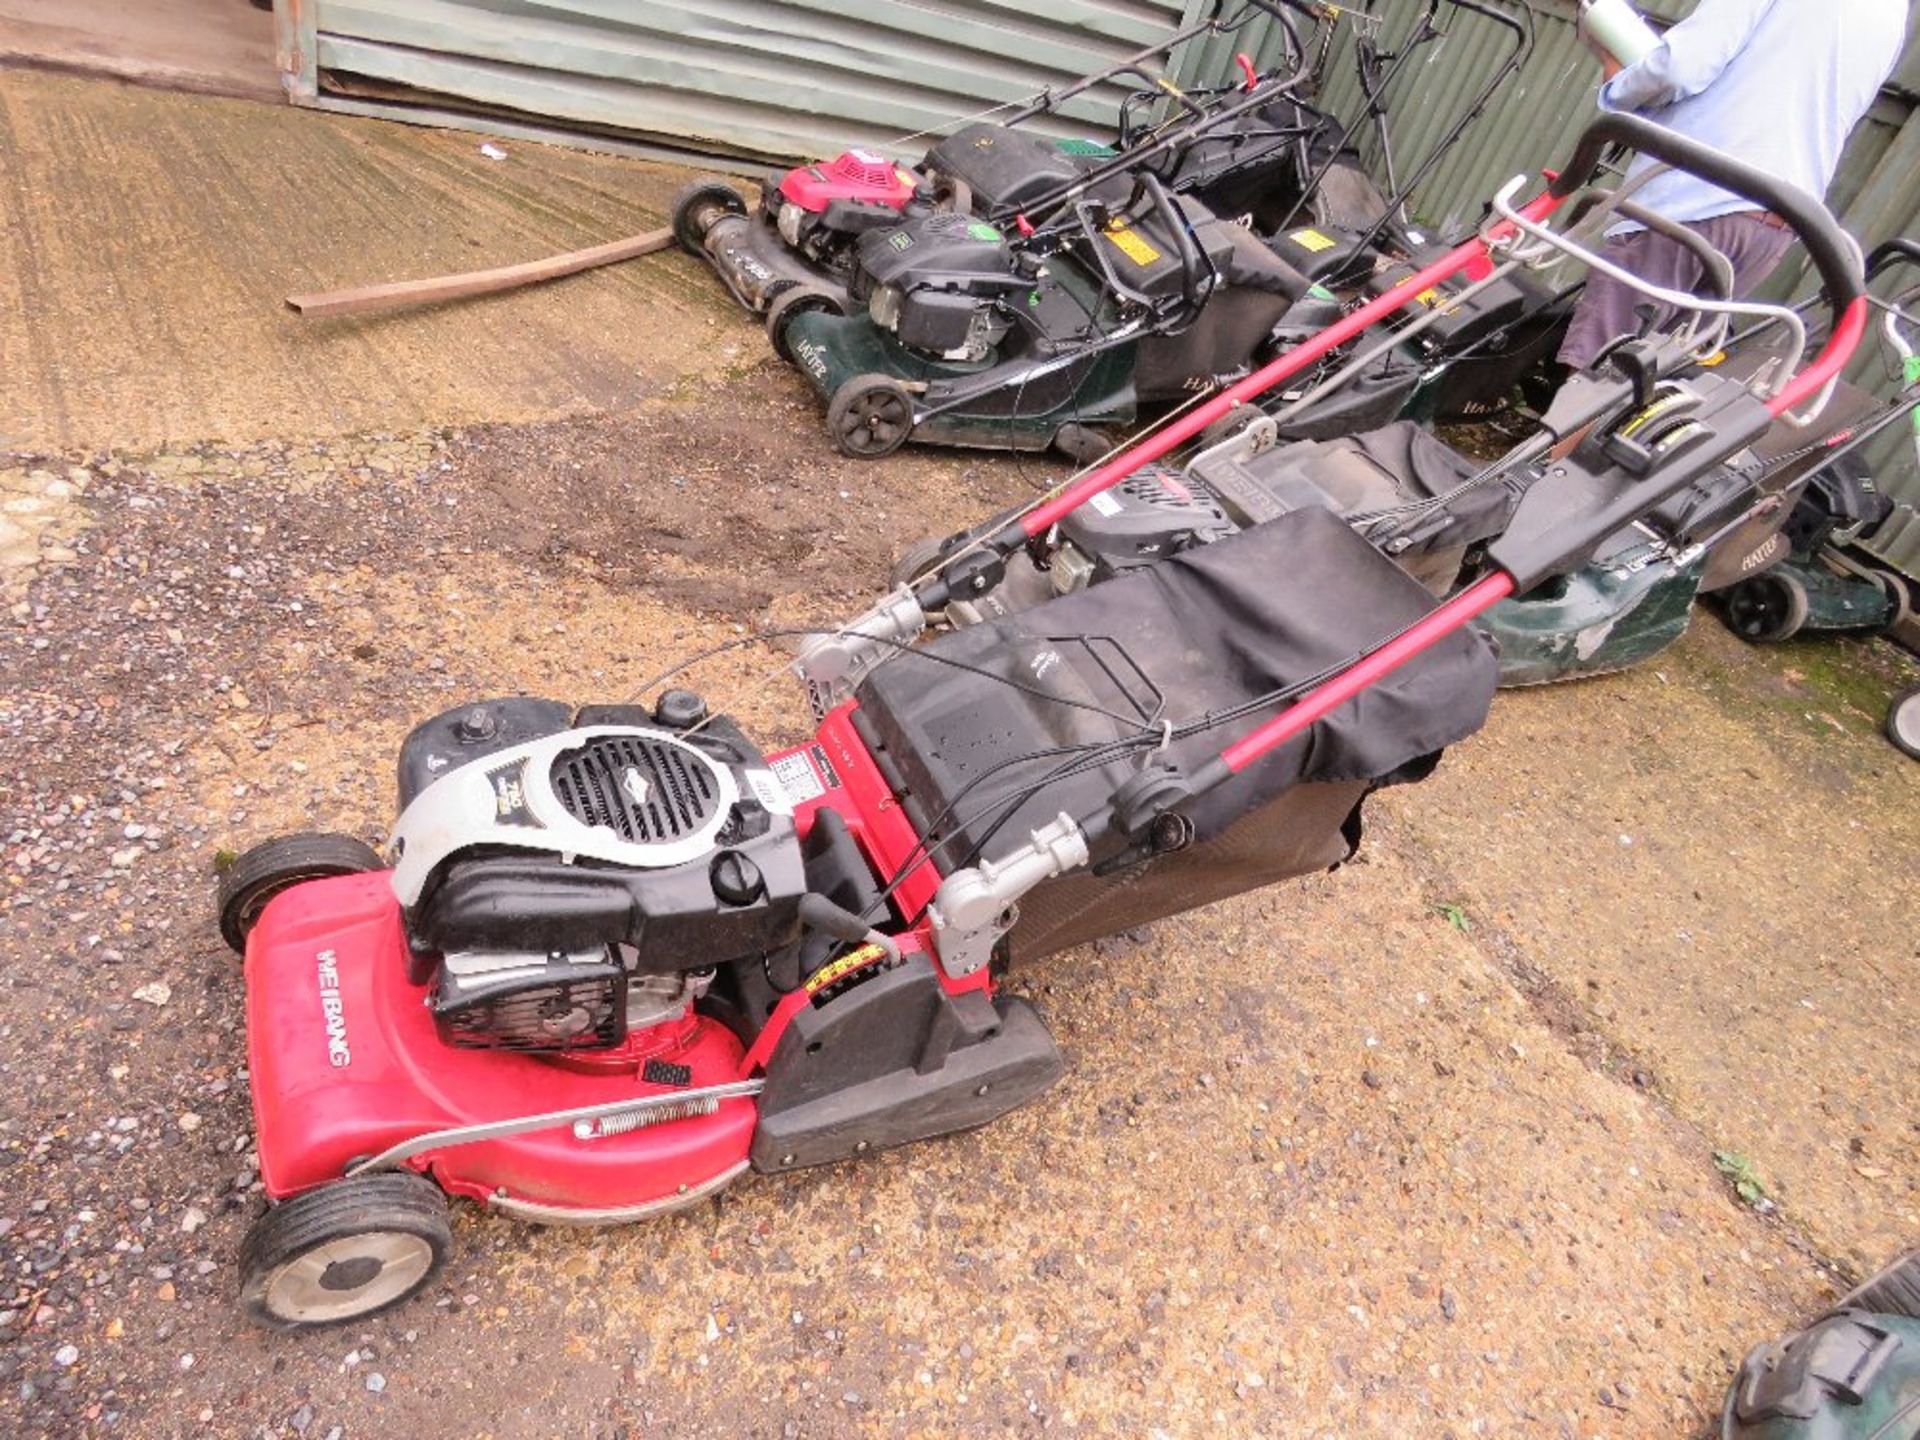 WEIBANG LEGACY 48V ROLLER MOWER WITH COLLECTOR. DIRECT FROM LOCAL LANDSCAPE COMPANY WHO ARE CLOSING